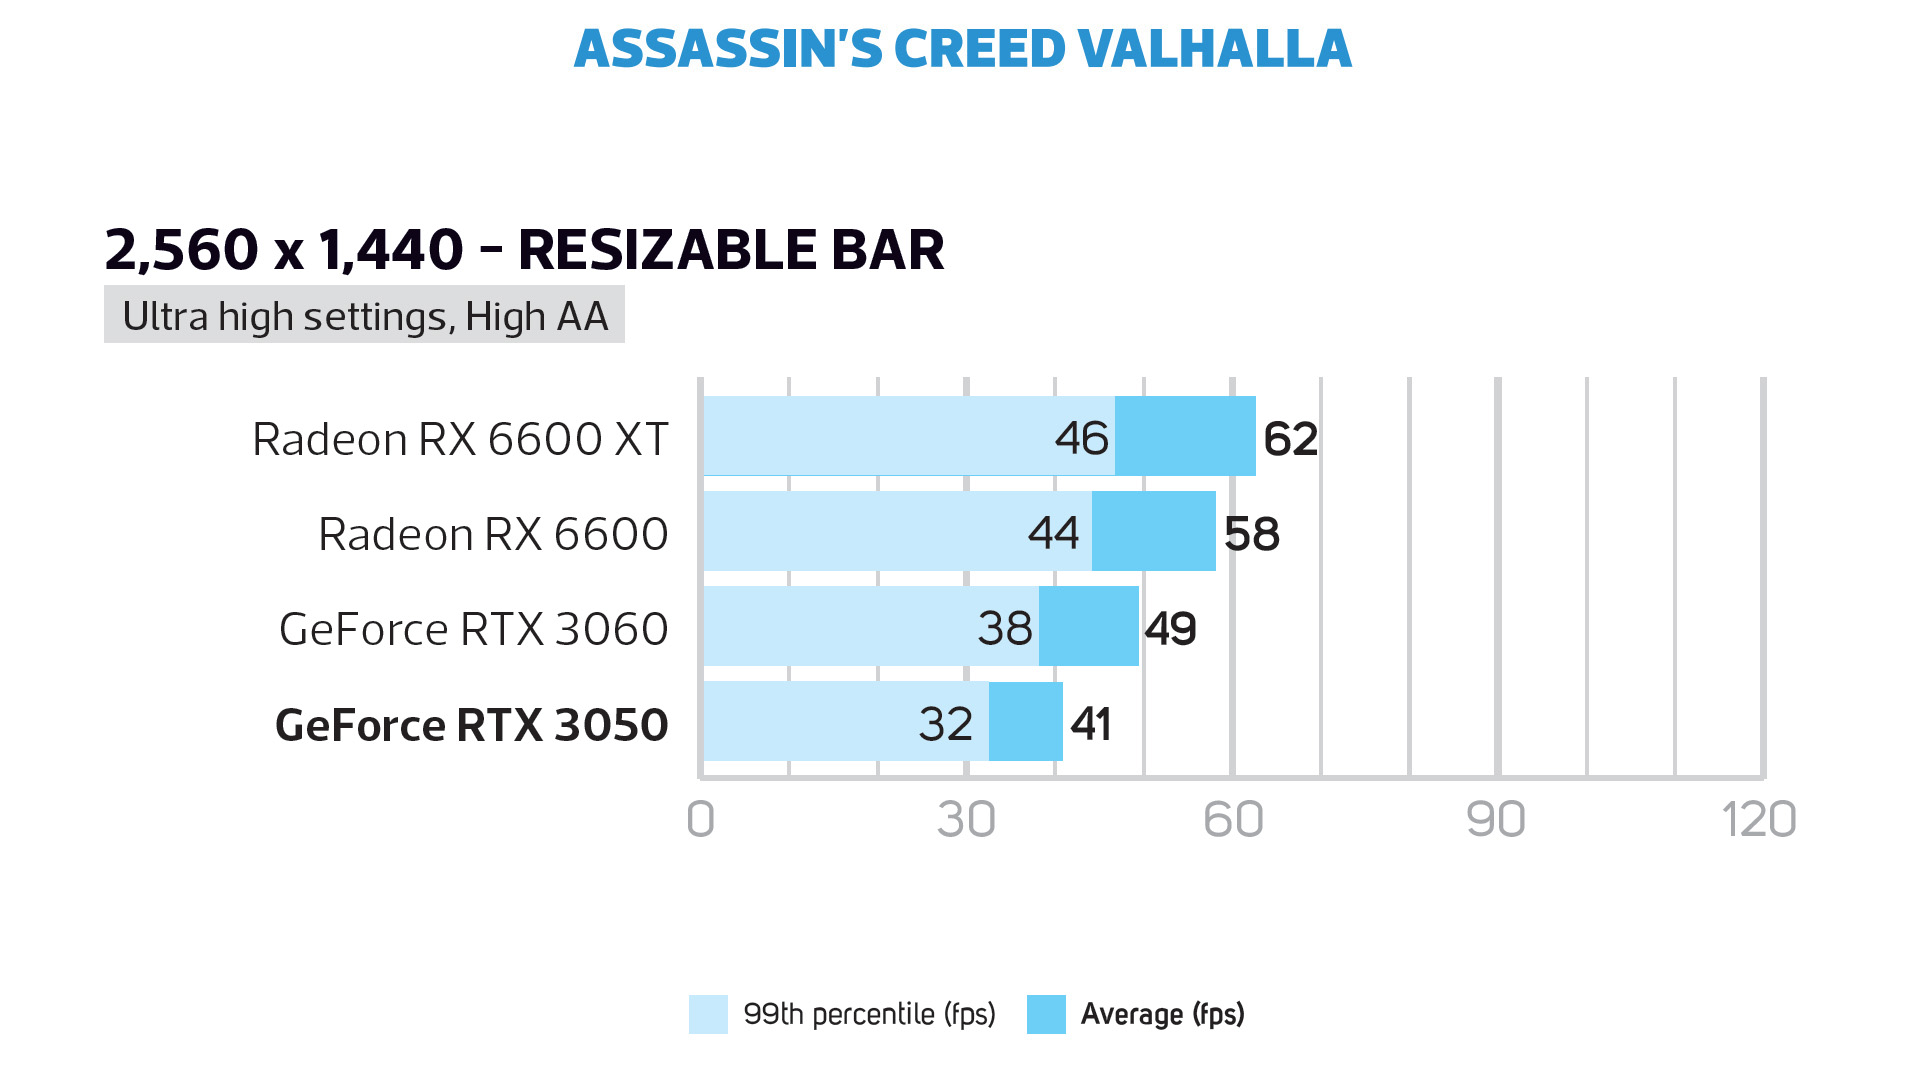 GeForce RTX 3050 1440p Assassin's Creed frame rate